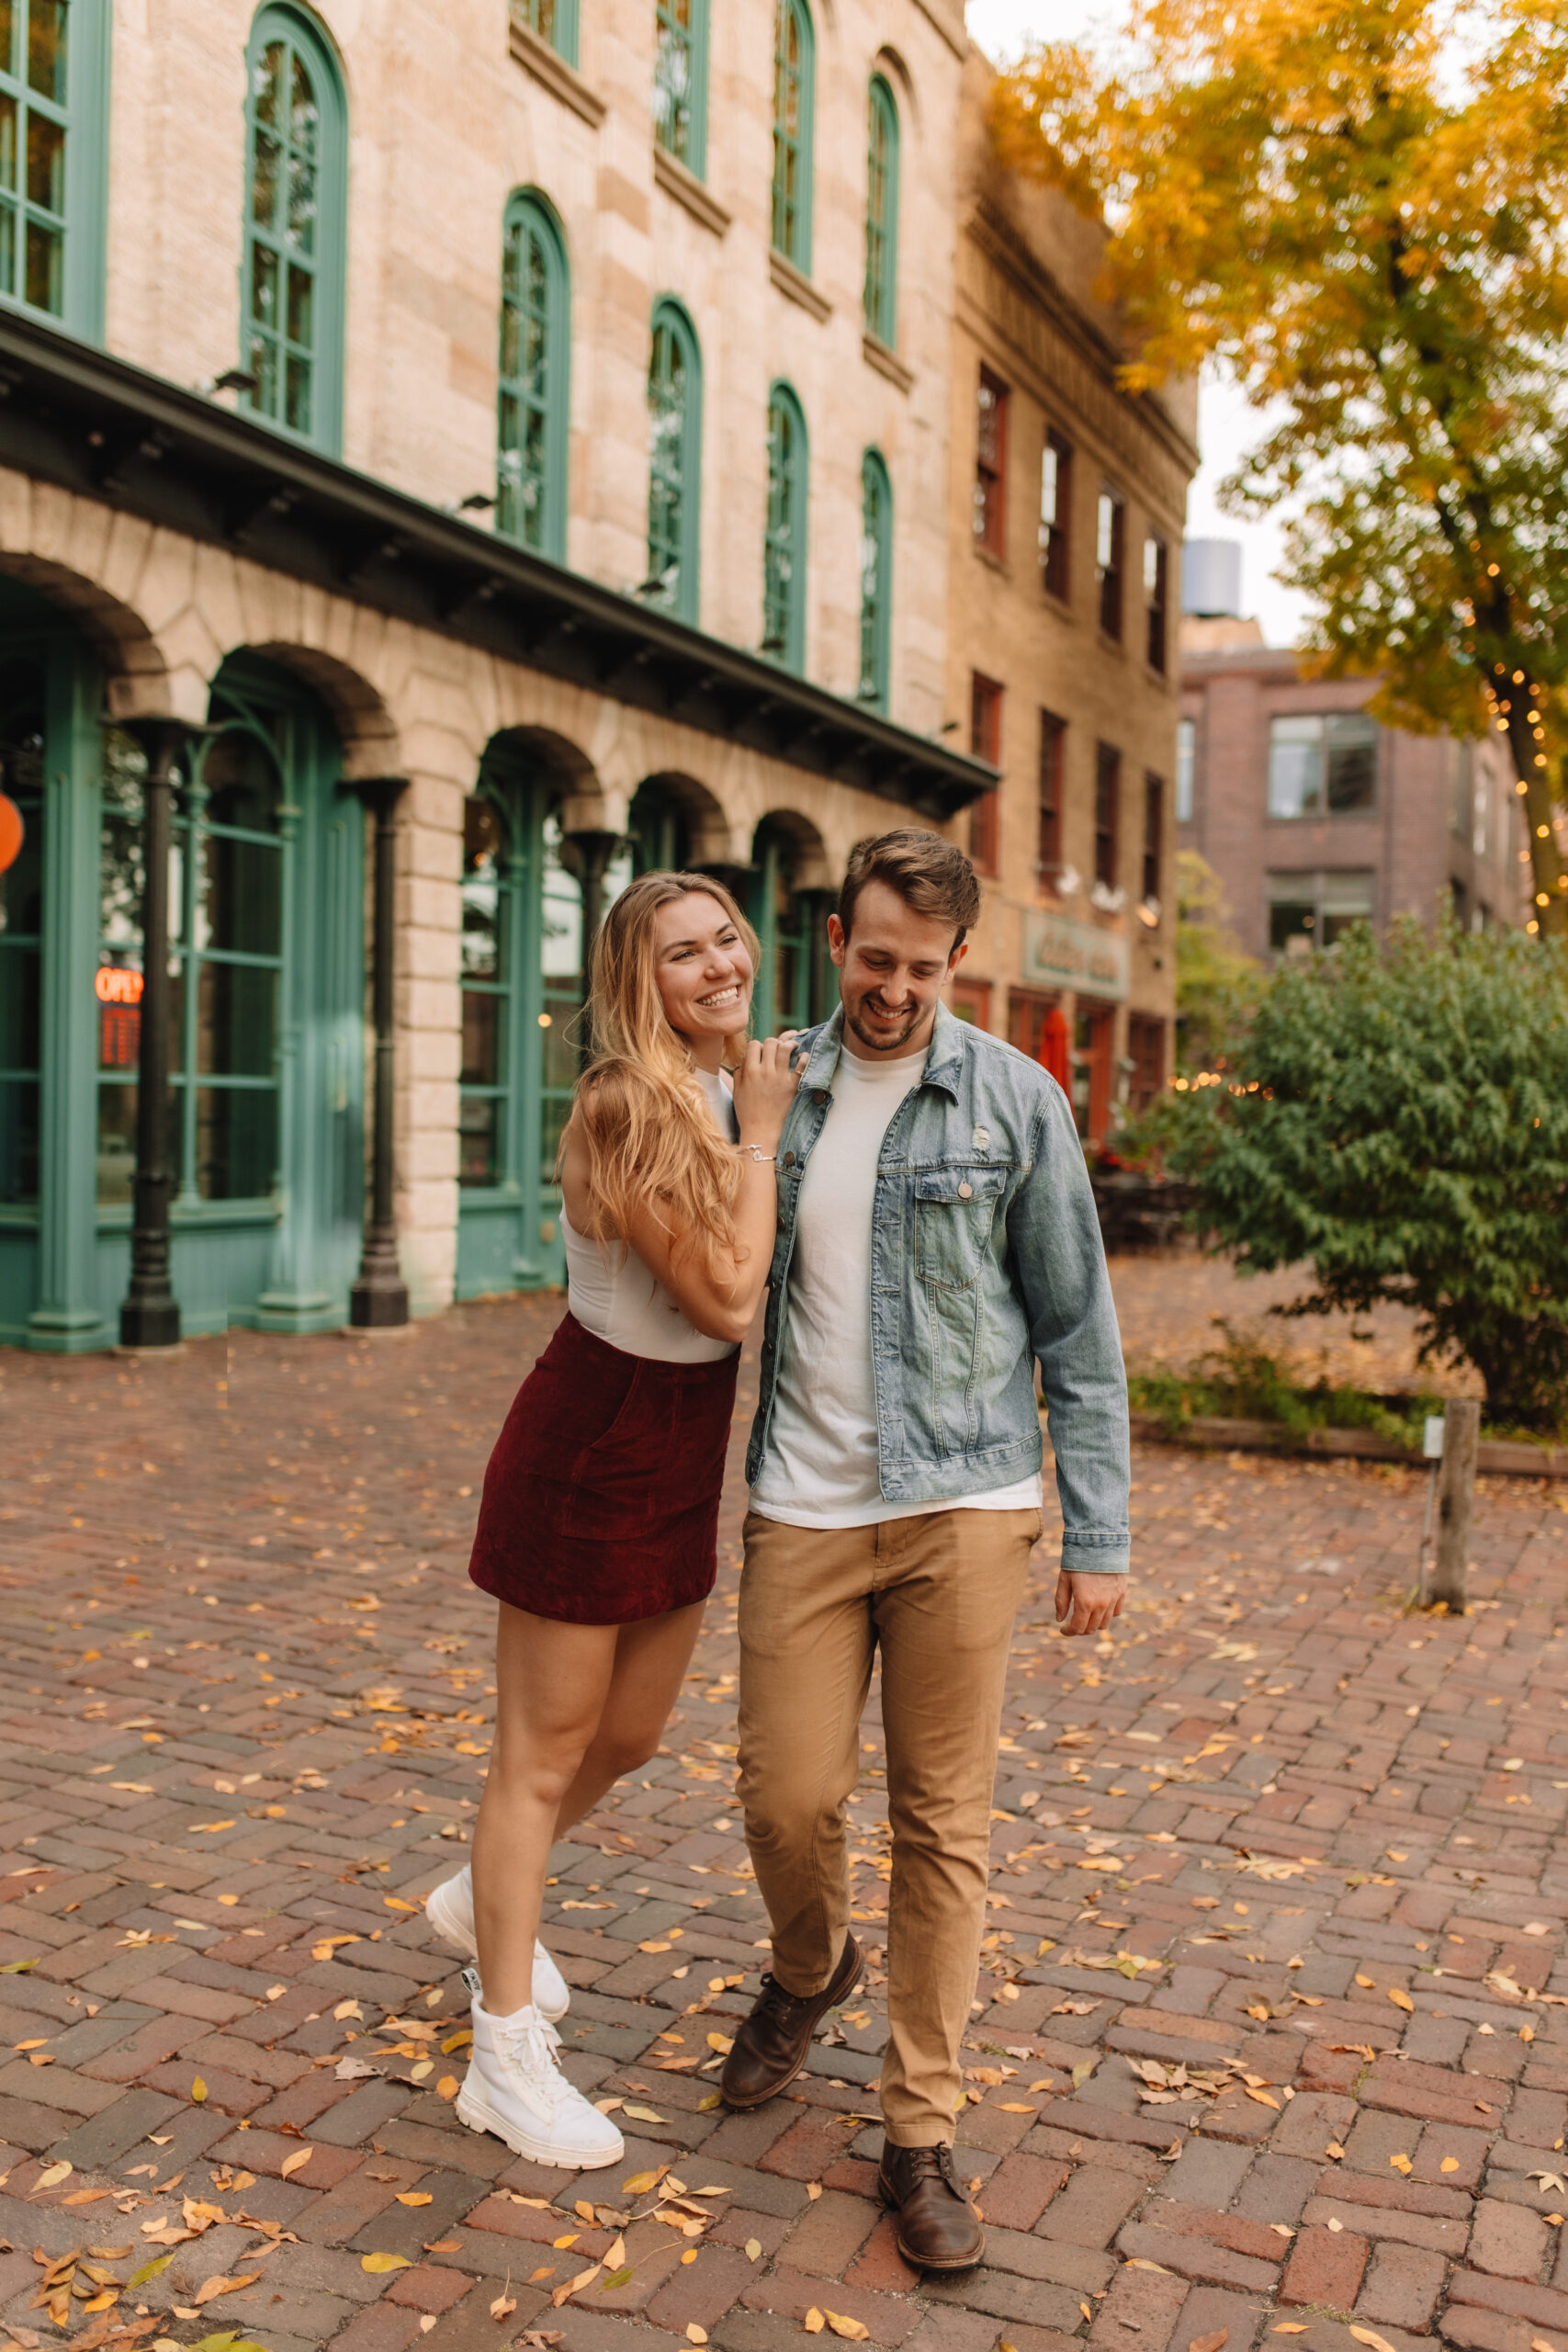 A young couple smiles and walks together on a brick pathway in a charming urban area with historic buildings and autumn foliage.